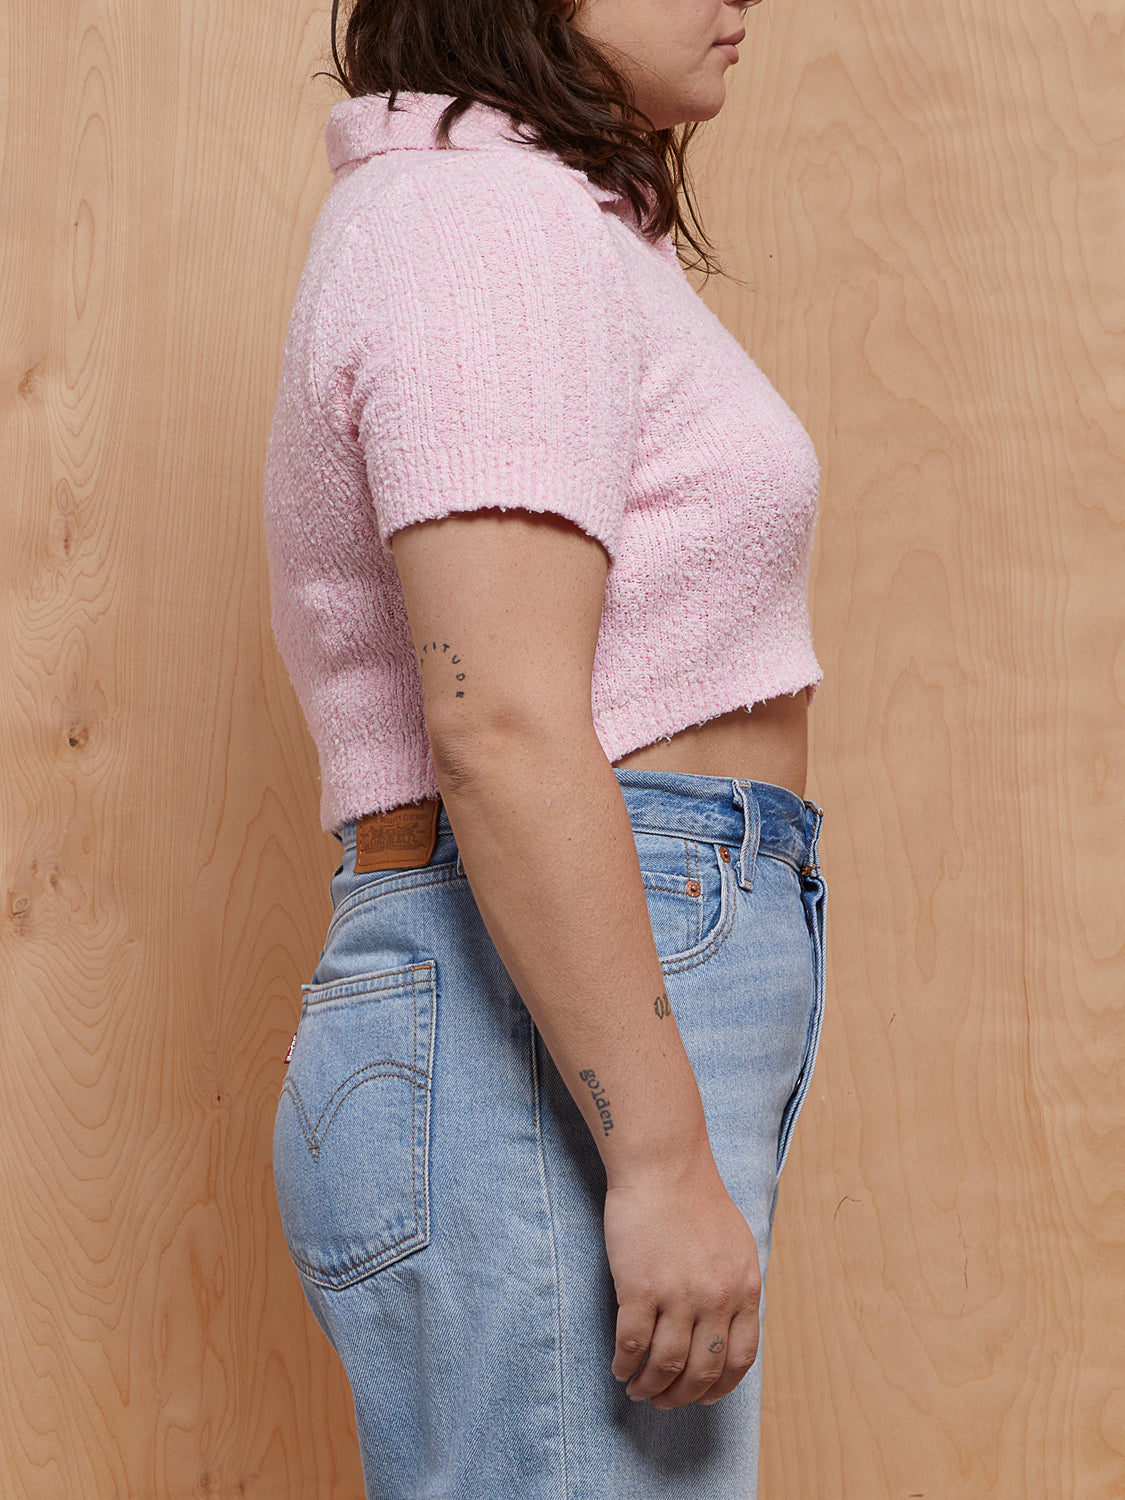 Urban Outfitters Collared Knit Crop Top